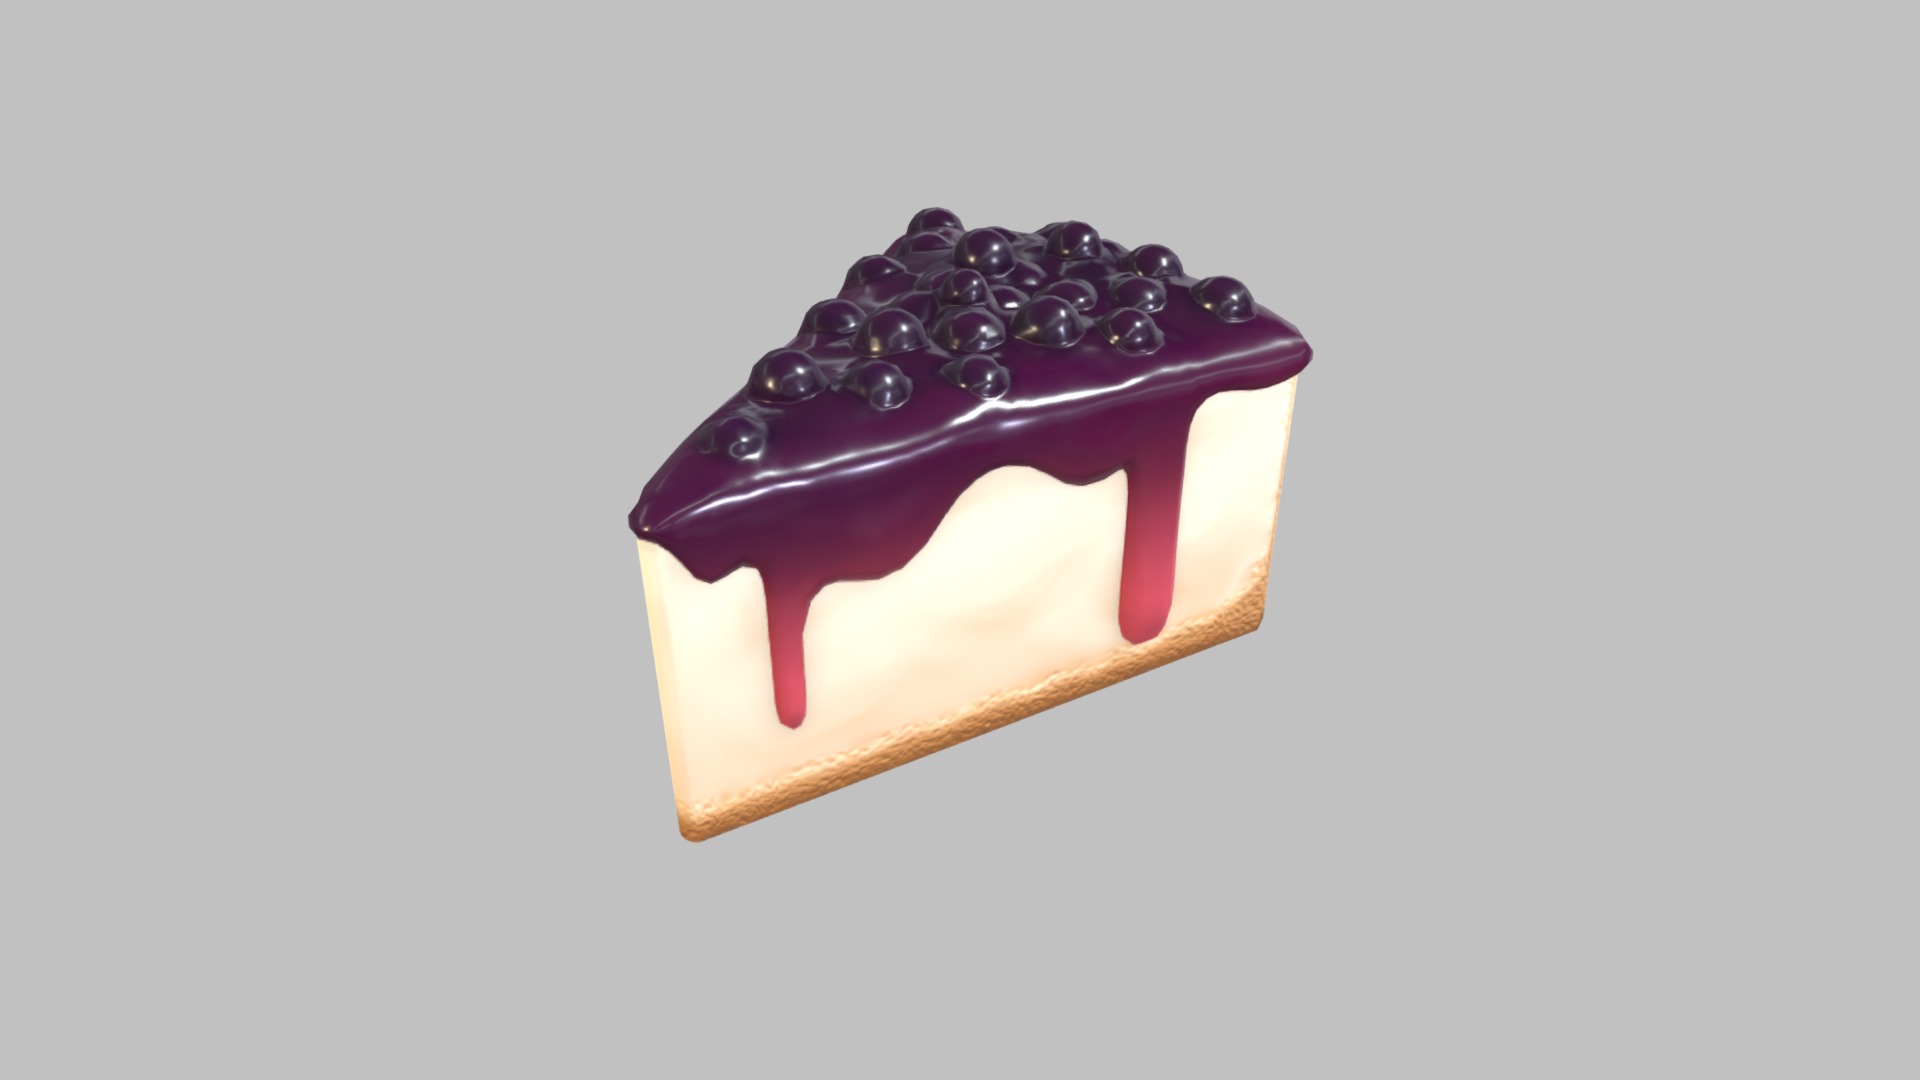 3D model Blueberry Cheesecake - This is a 3D model of the Blueberry Cheesecake. The 3D model is about a cake with blackberries on top.